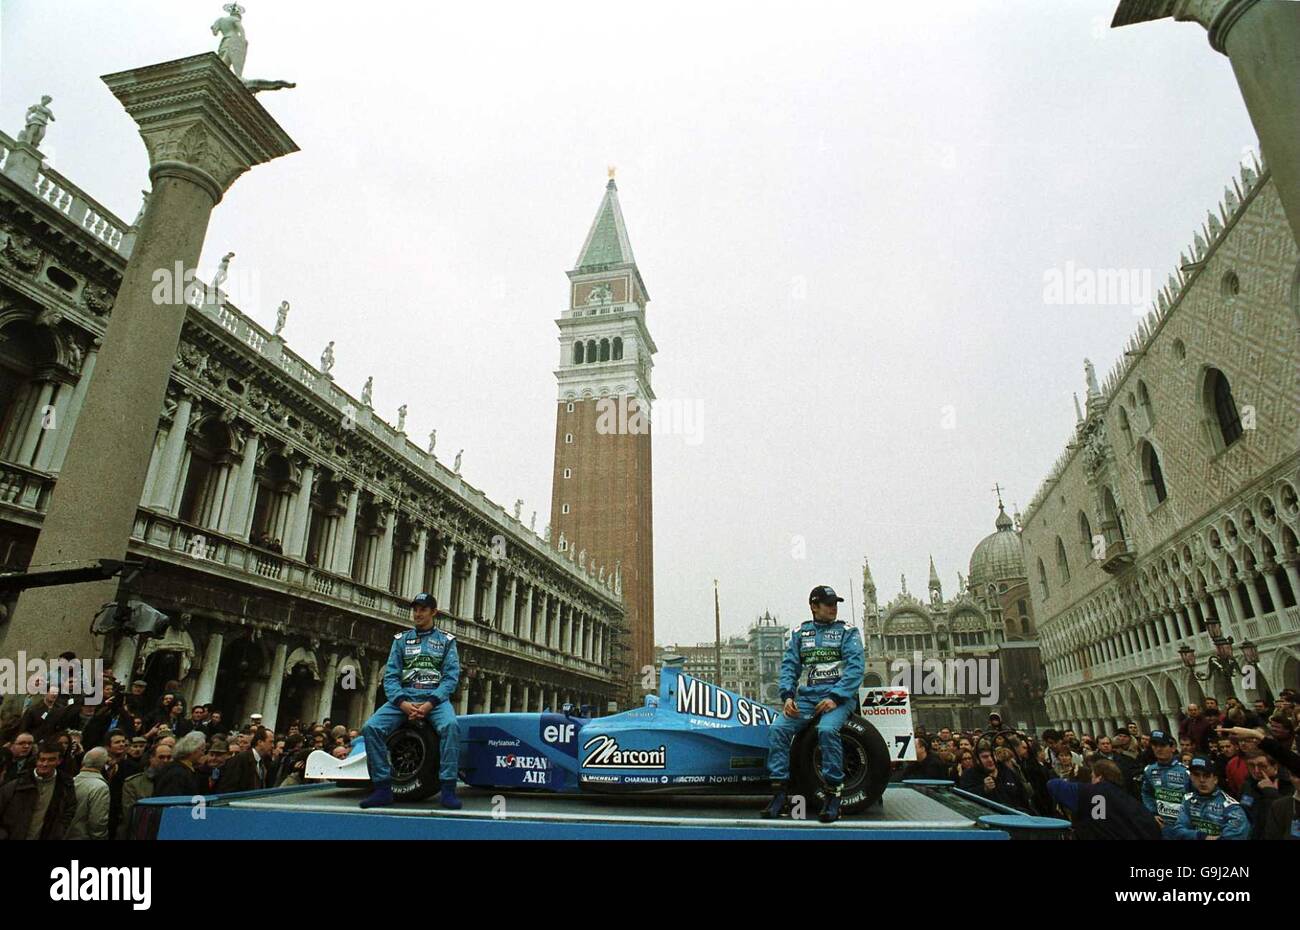 Motor Racing - Formula One - Mild Seven Benetton Renault Sport B201 car launch - Venice. L-R: Jenson Button and Giancarlo Fisichella at the launch of the Mild Seven Benetton Renault Sport B201 car in Piazza San Marco in Venice Stock Photo